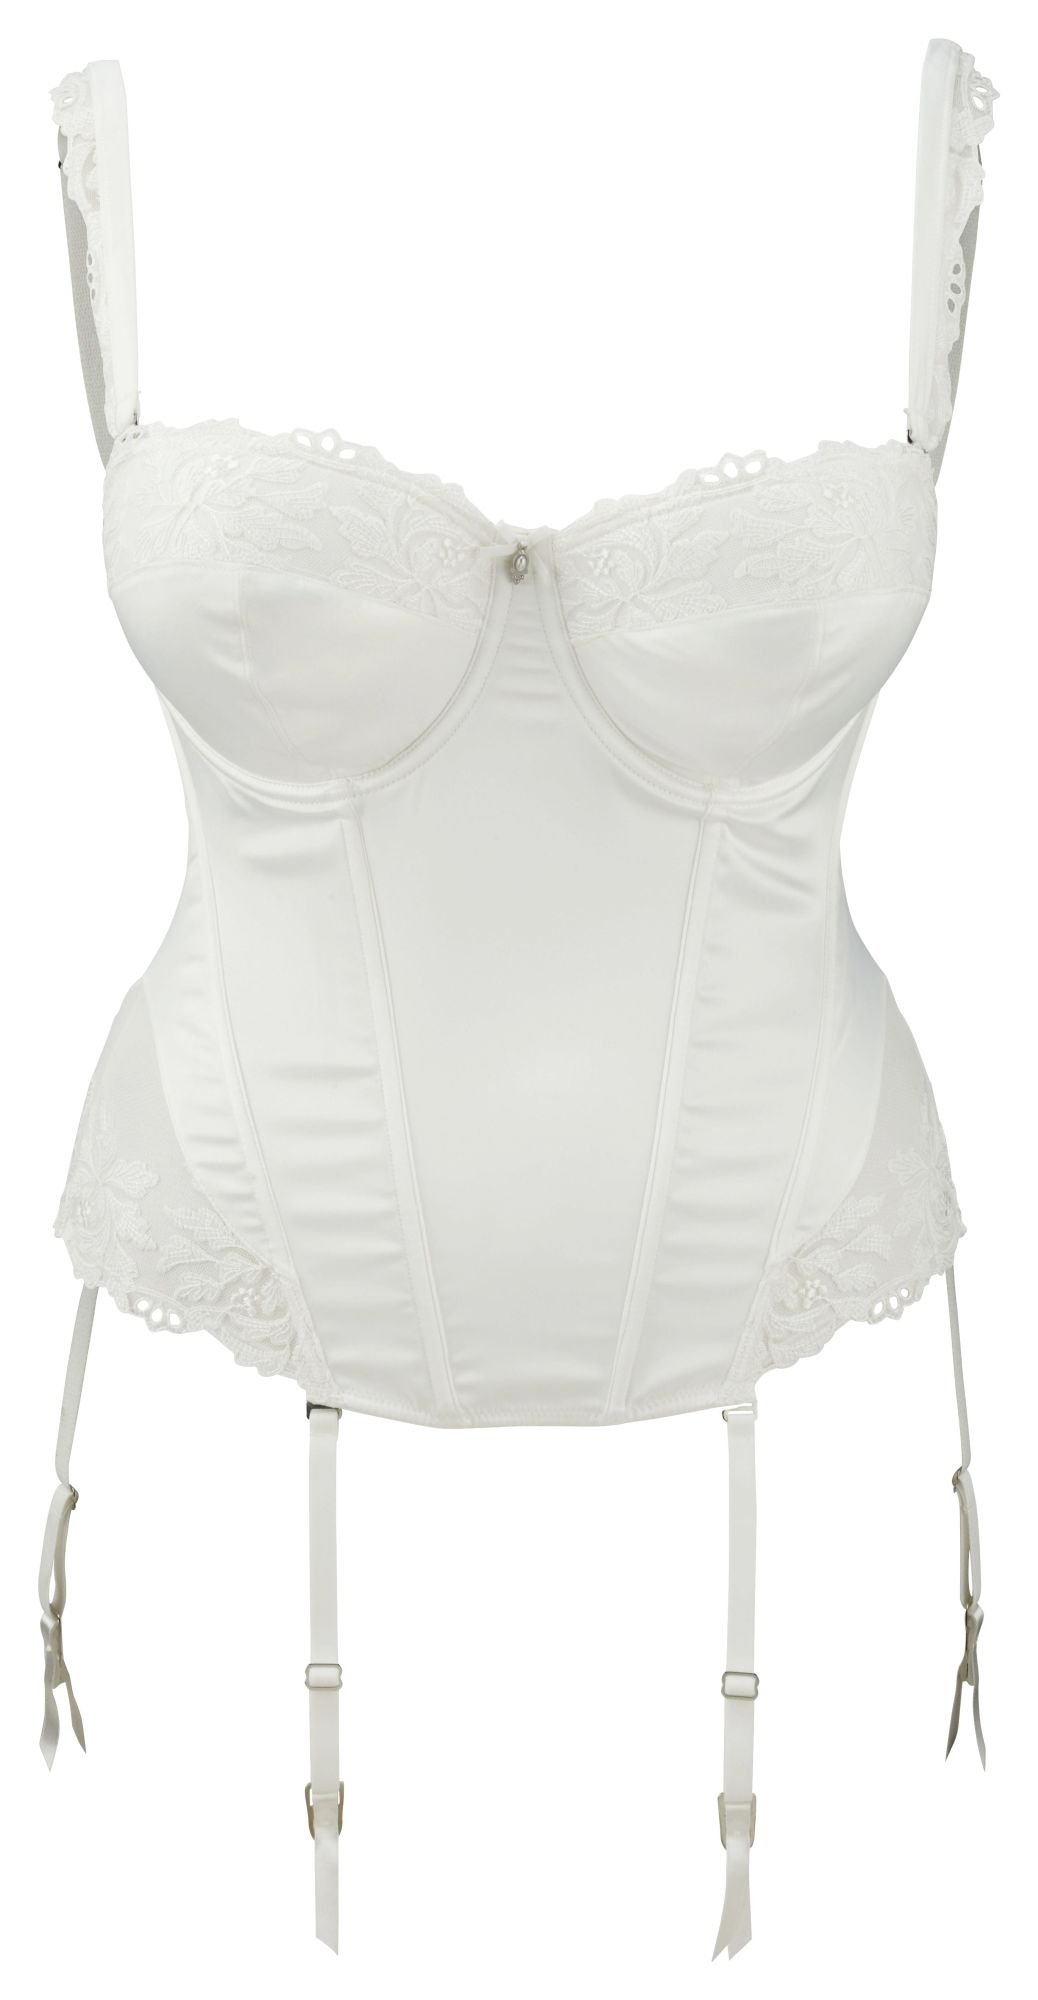 Lace Corset Serenity Ivory